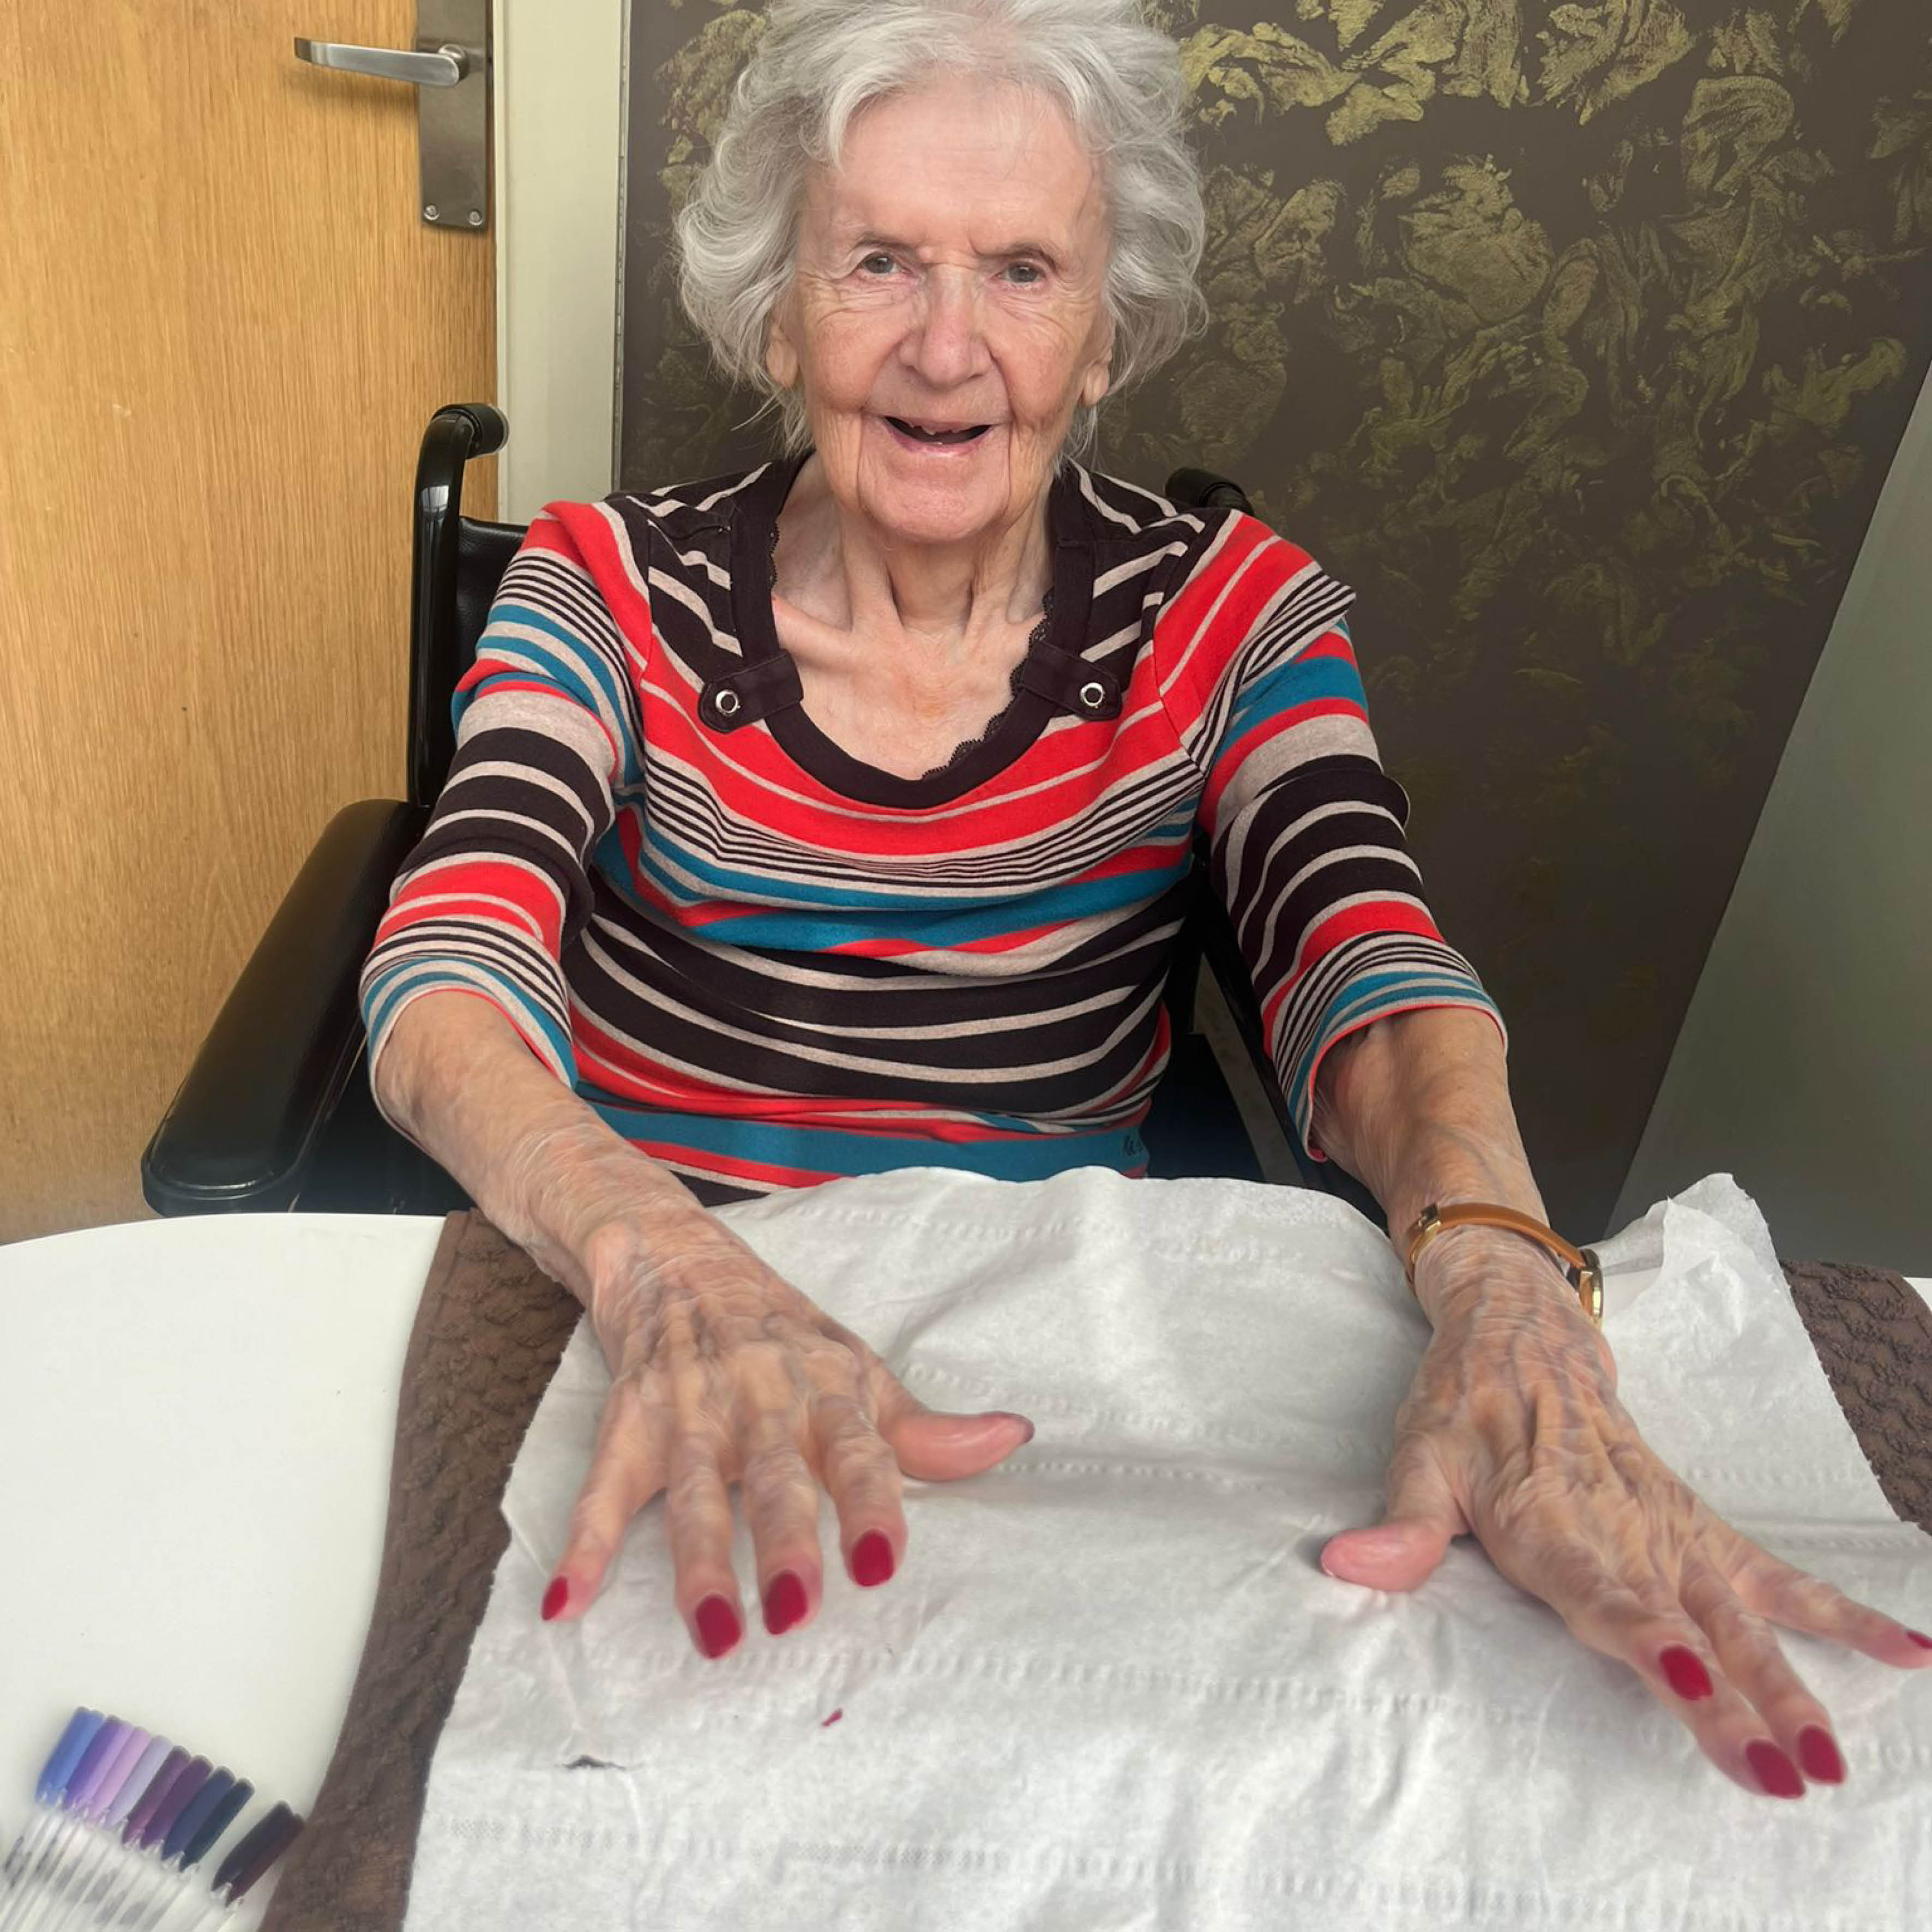 Spa Day wish granted for resident Joyce at Somerset House Care & Nursing Home